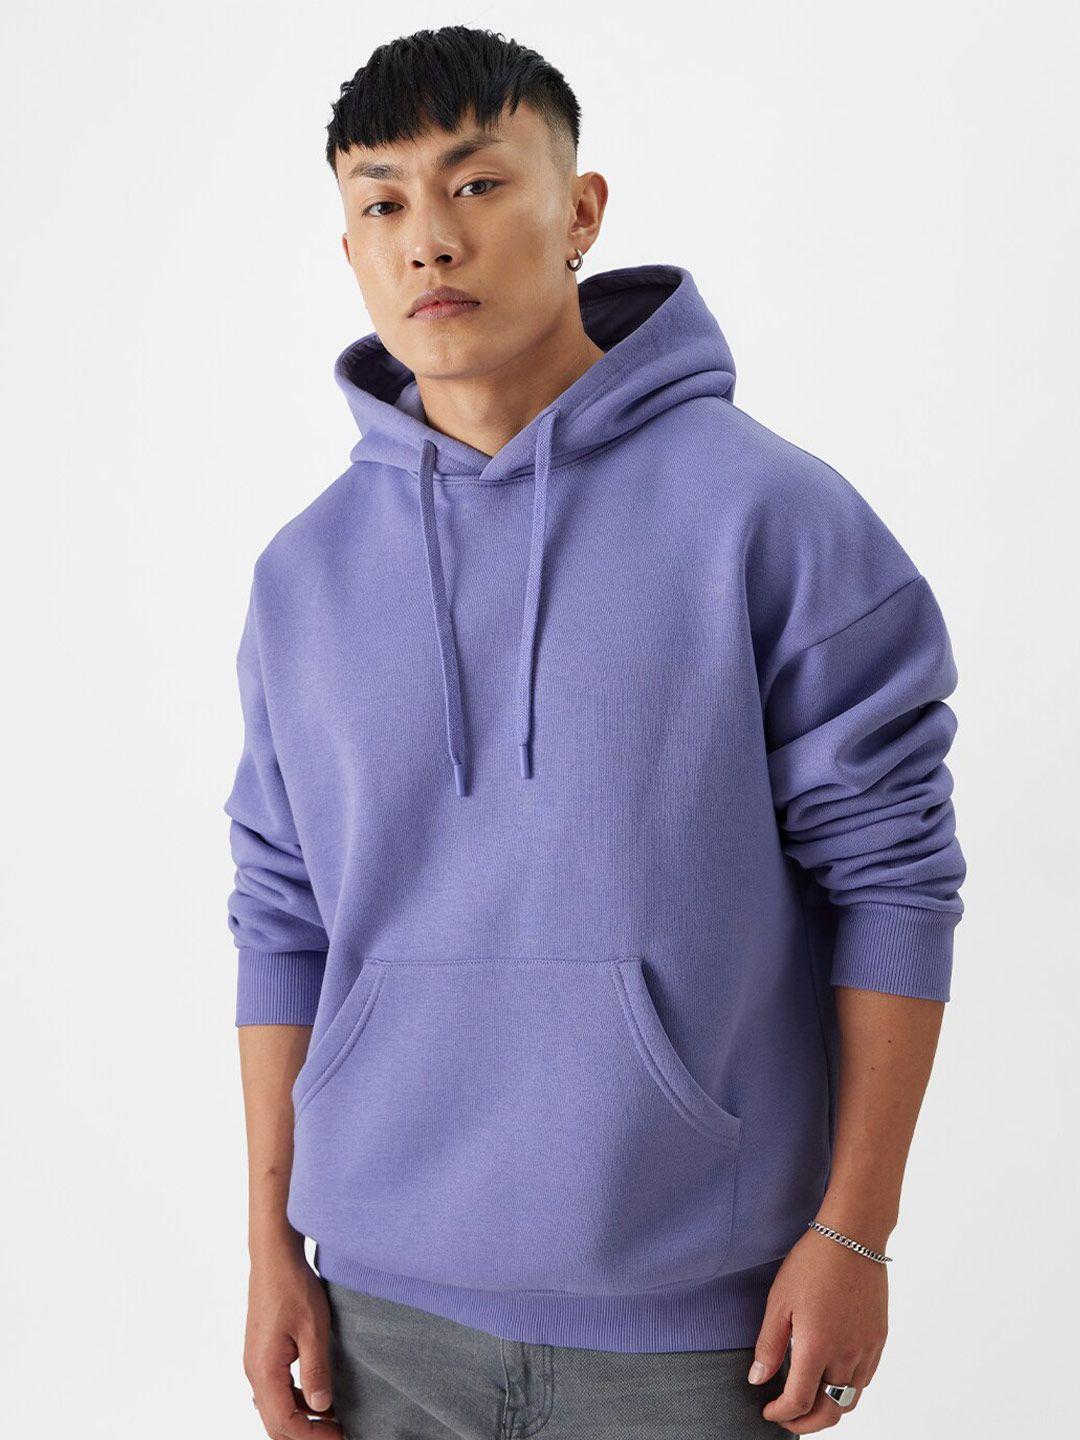 the-souled-store-lavender-hooded-long-sleeves-pullover